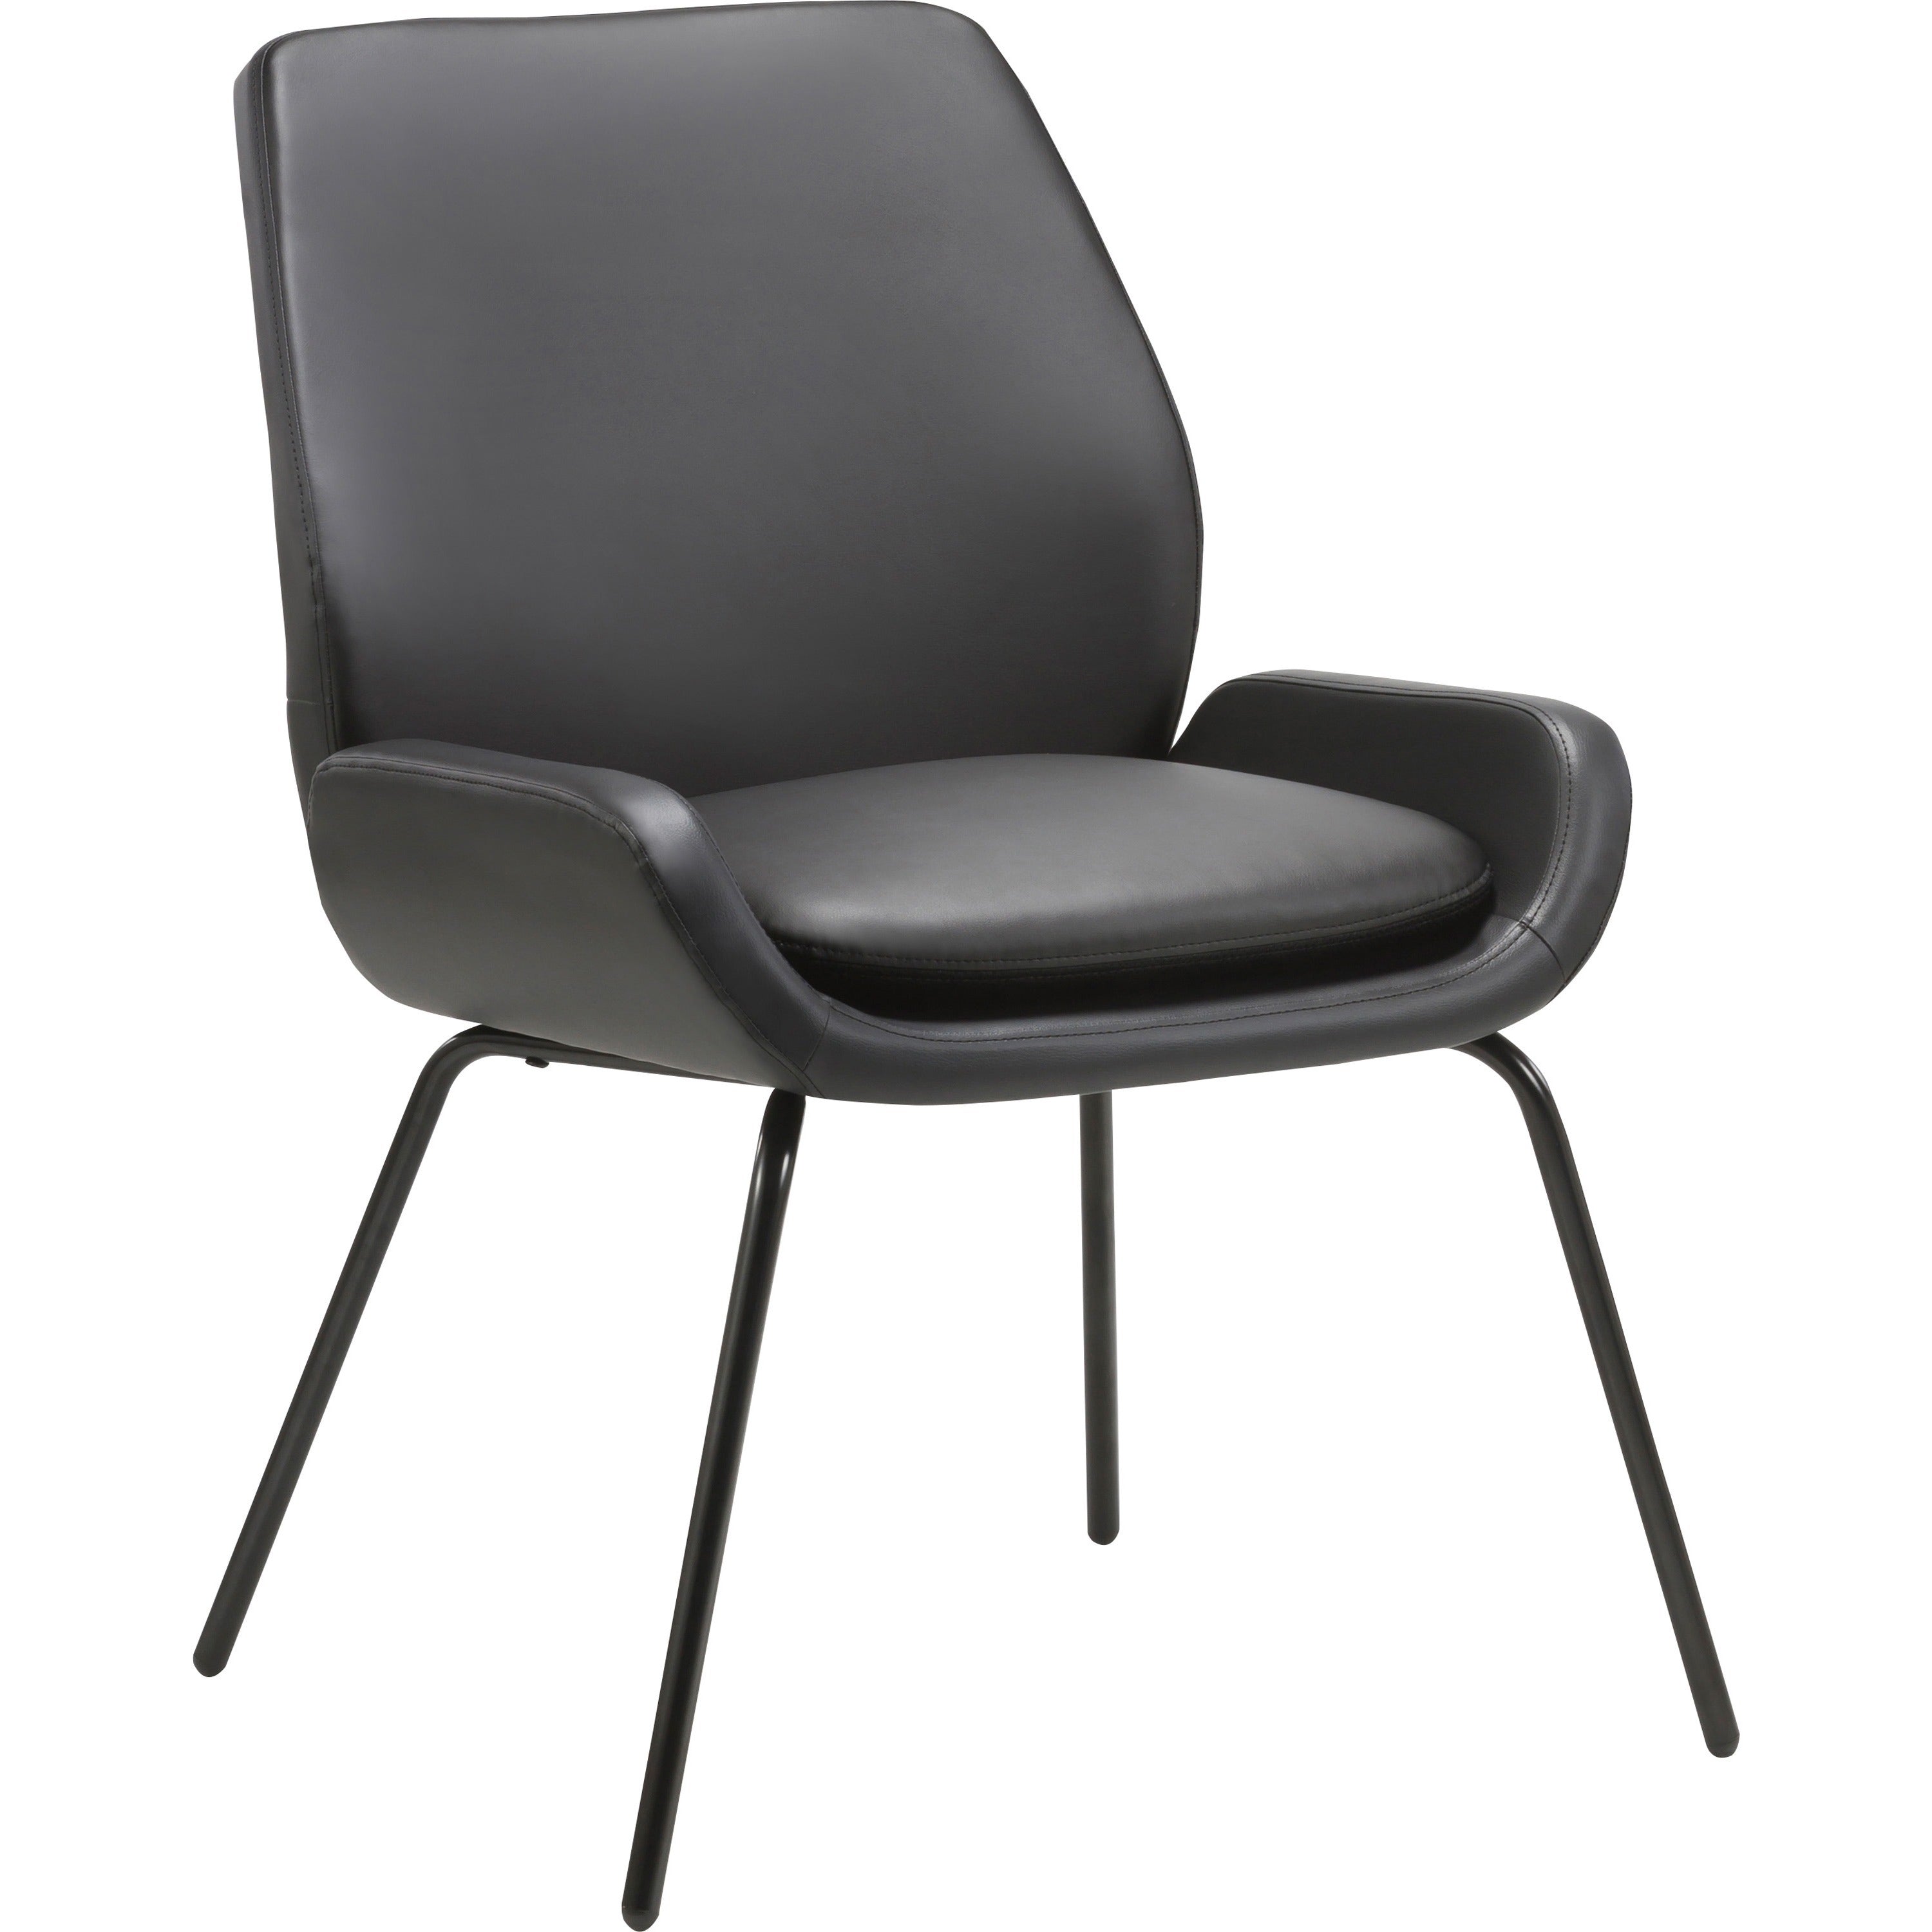 lorell-u-shaped-seat-guest-chair-bonded-leather-seat-bonded-leather-back-black-1-each_llr68574 - 1